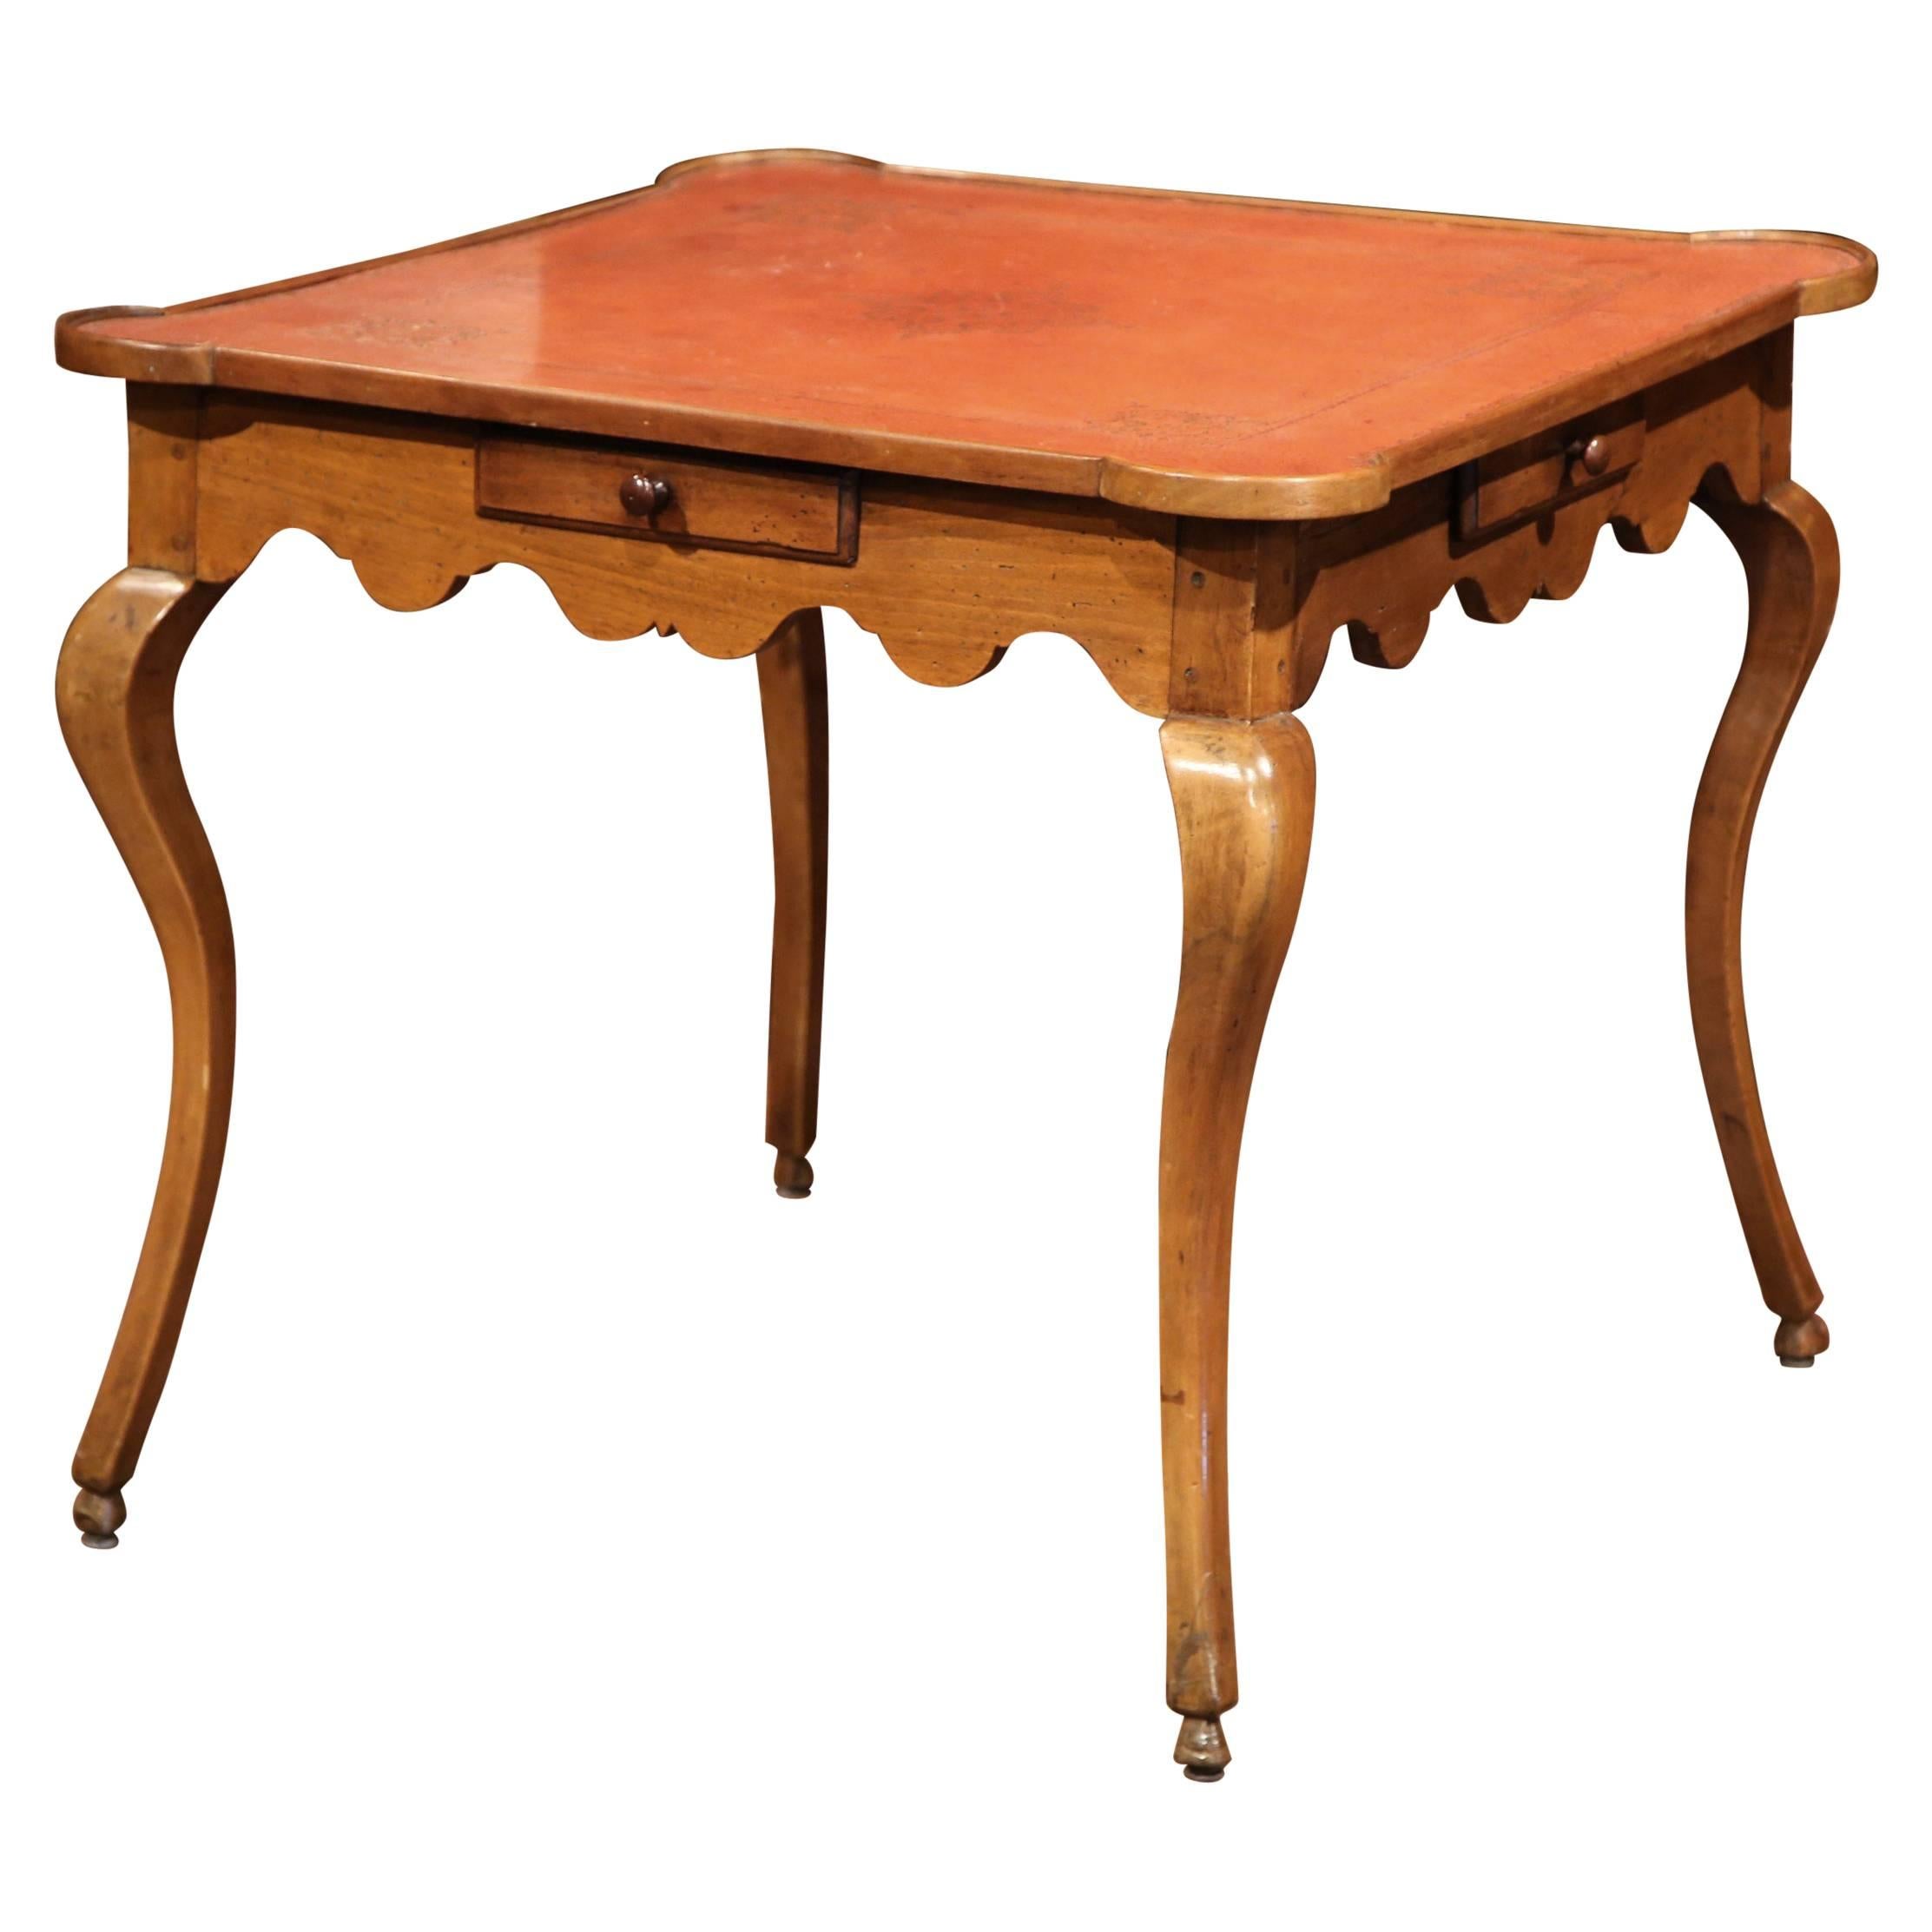 Mid-19th Century, French, Louis XV Walnut Game Table with Red Leather Top